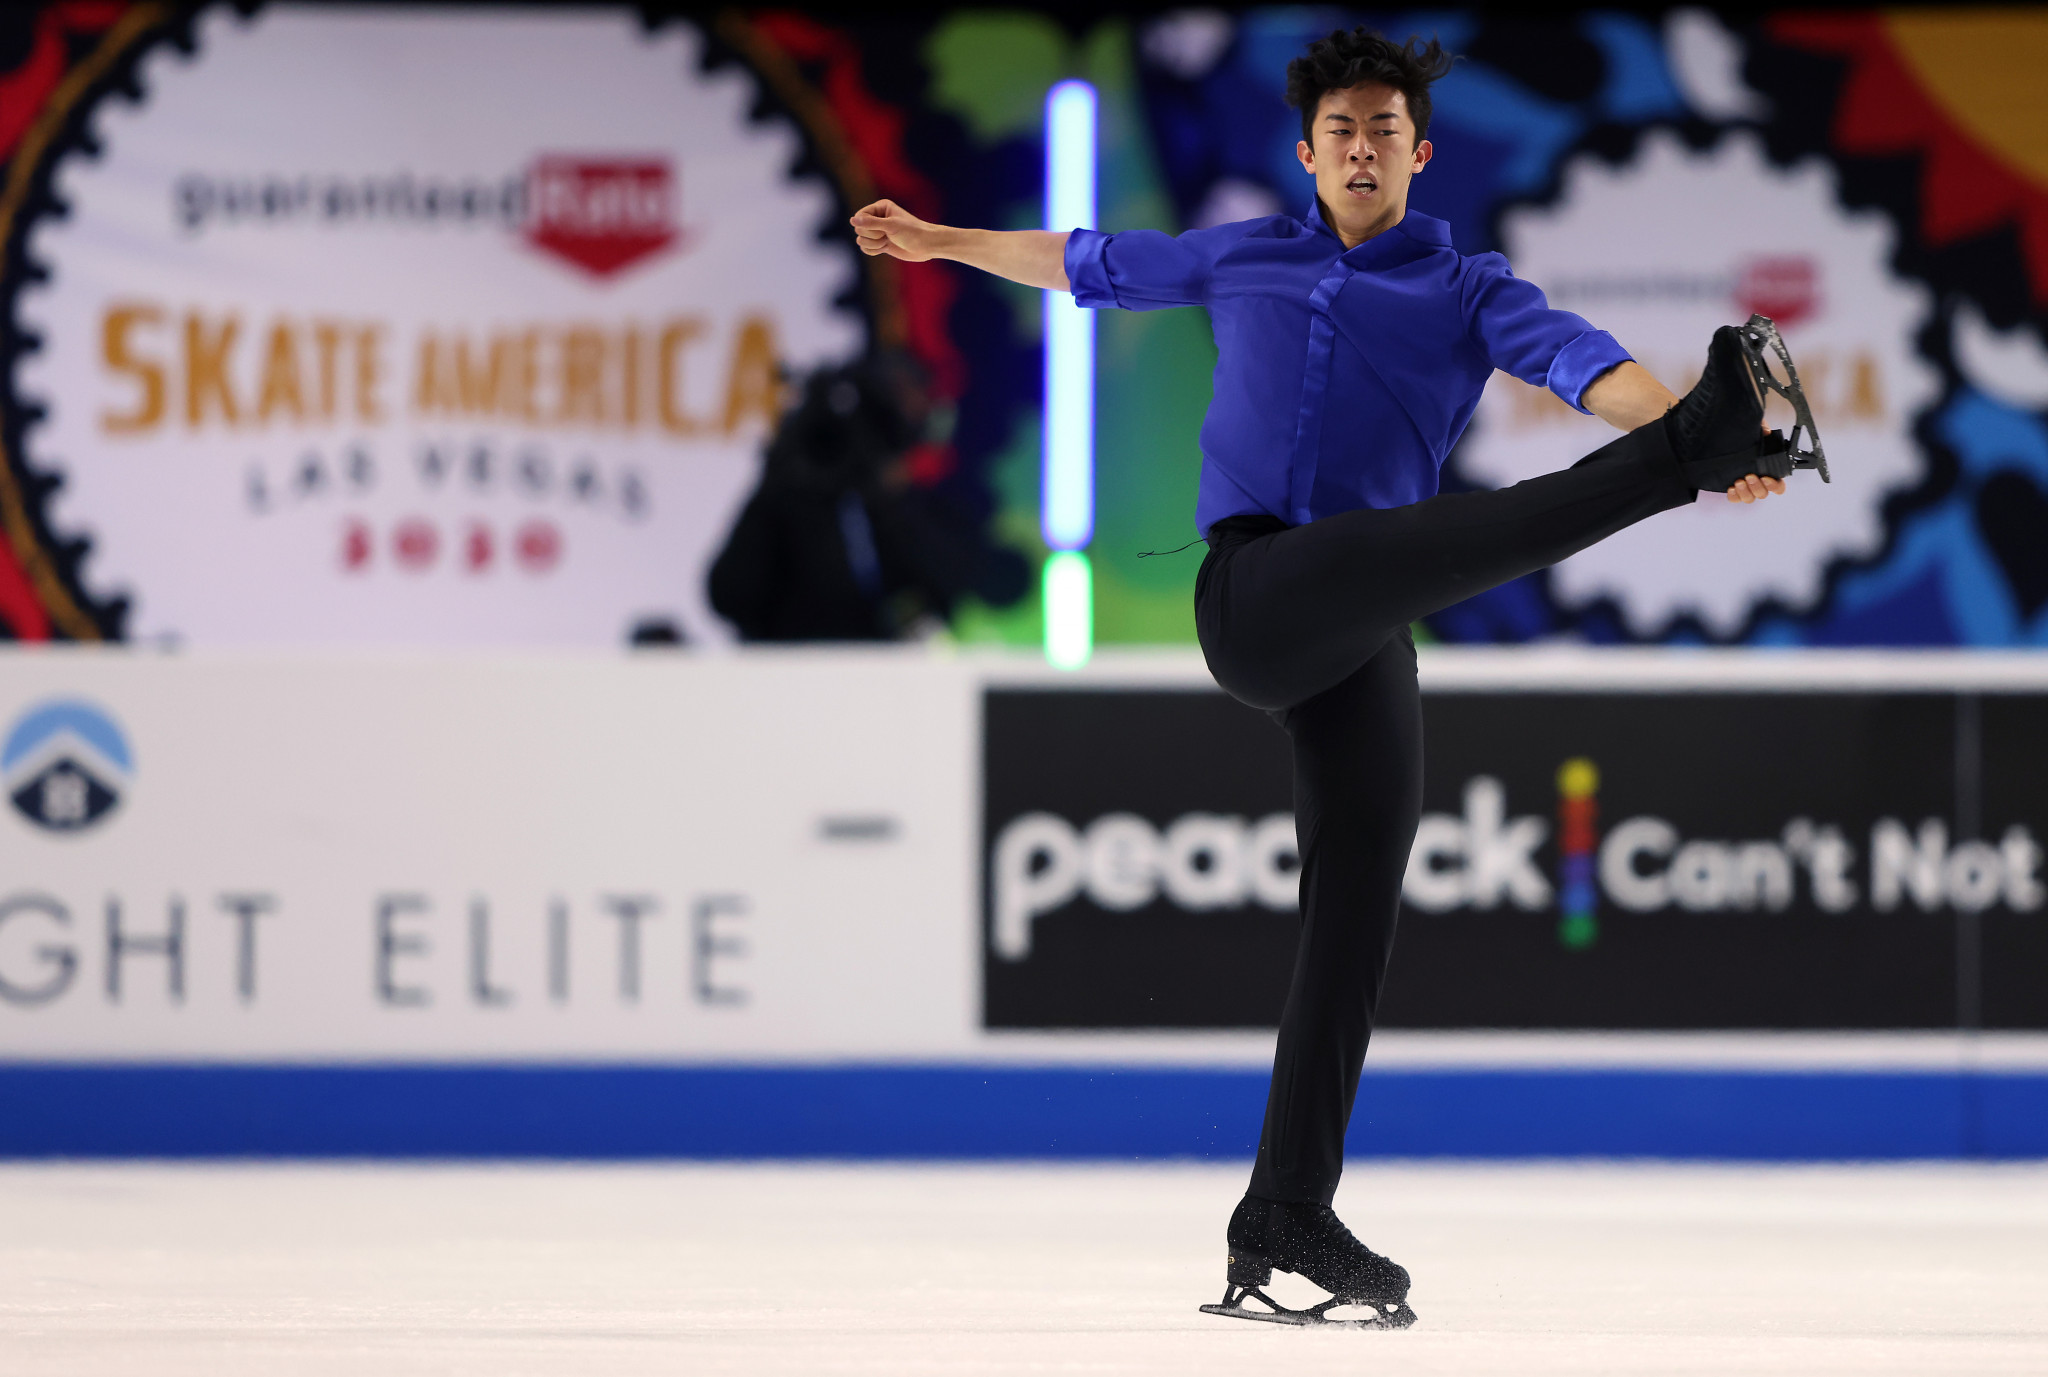 Chen predicts quintuple jump attempts in figure skating